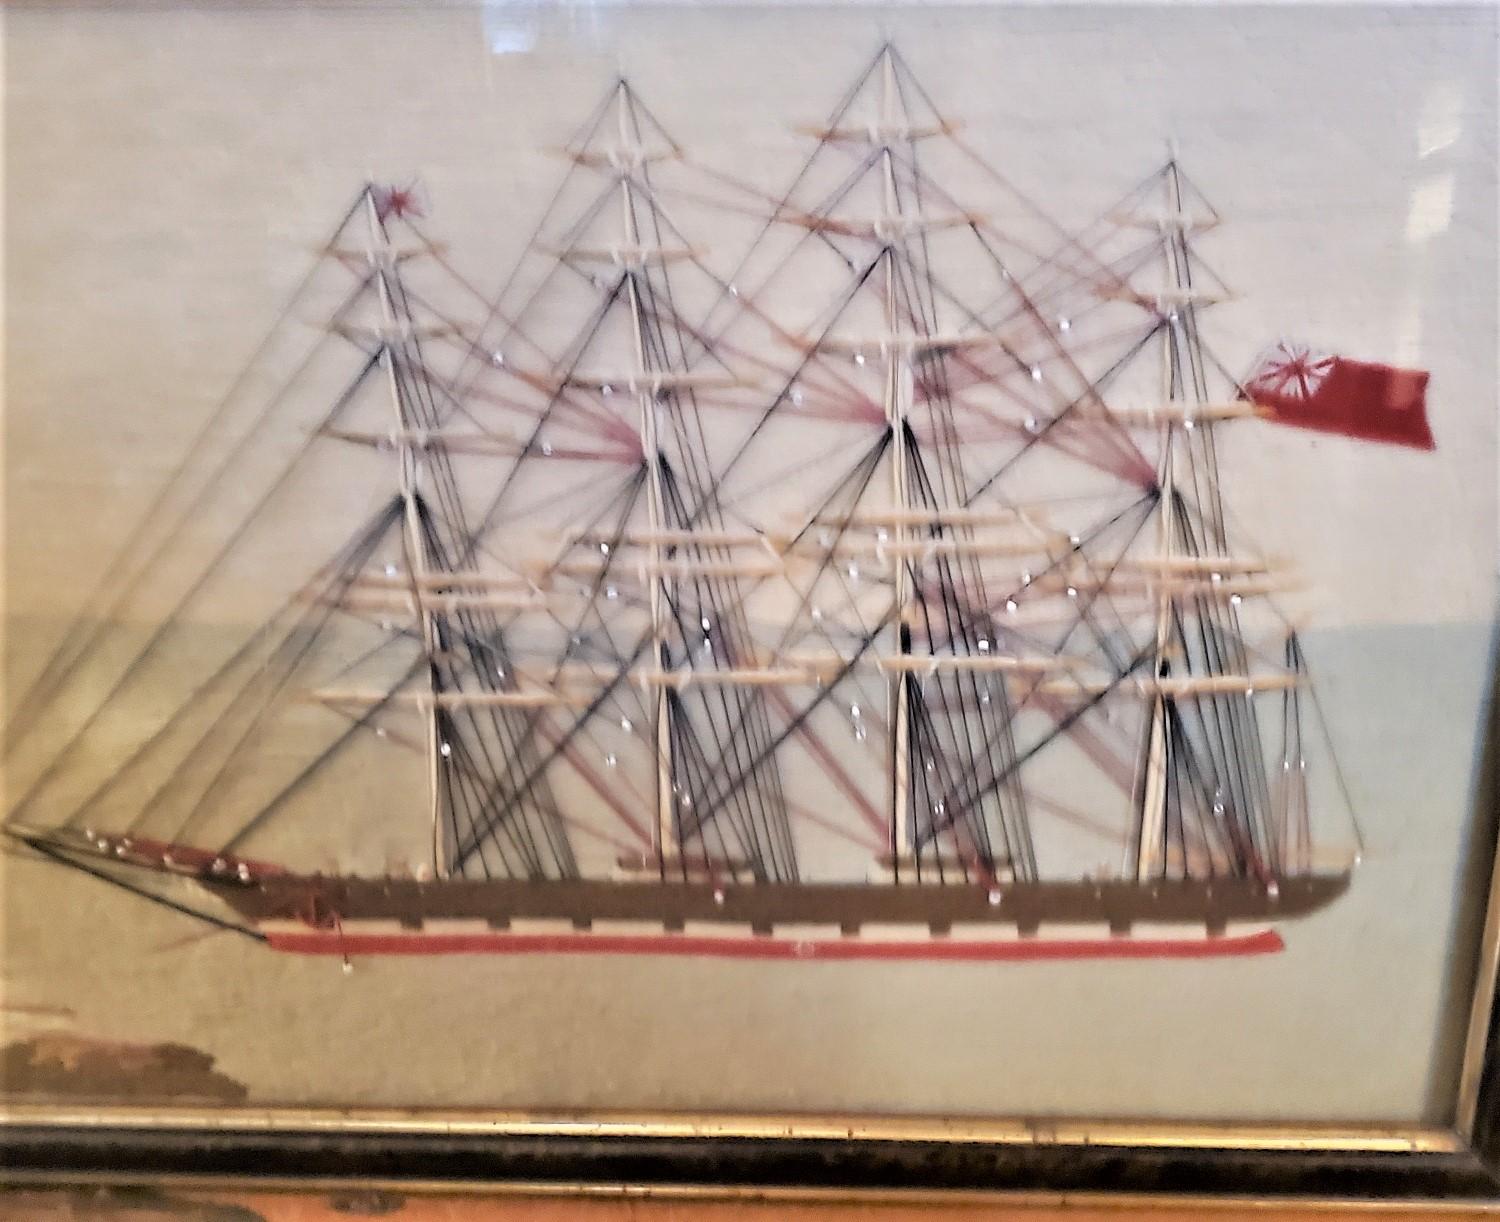 19th Century Sailor's Woolie port-side view of a four masted ship at anchor, circa 1880 - one of a matched pair - this one a port-side view of a large four-masted ship at anchor off a coastline with lighthouse, with a small lugger sailing in the